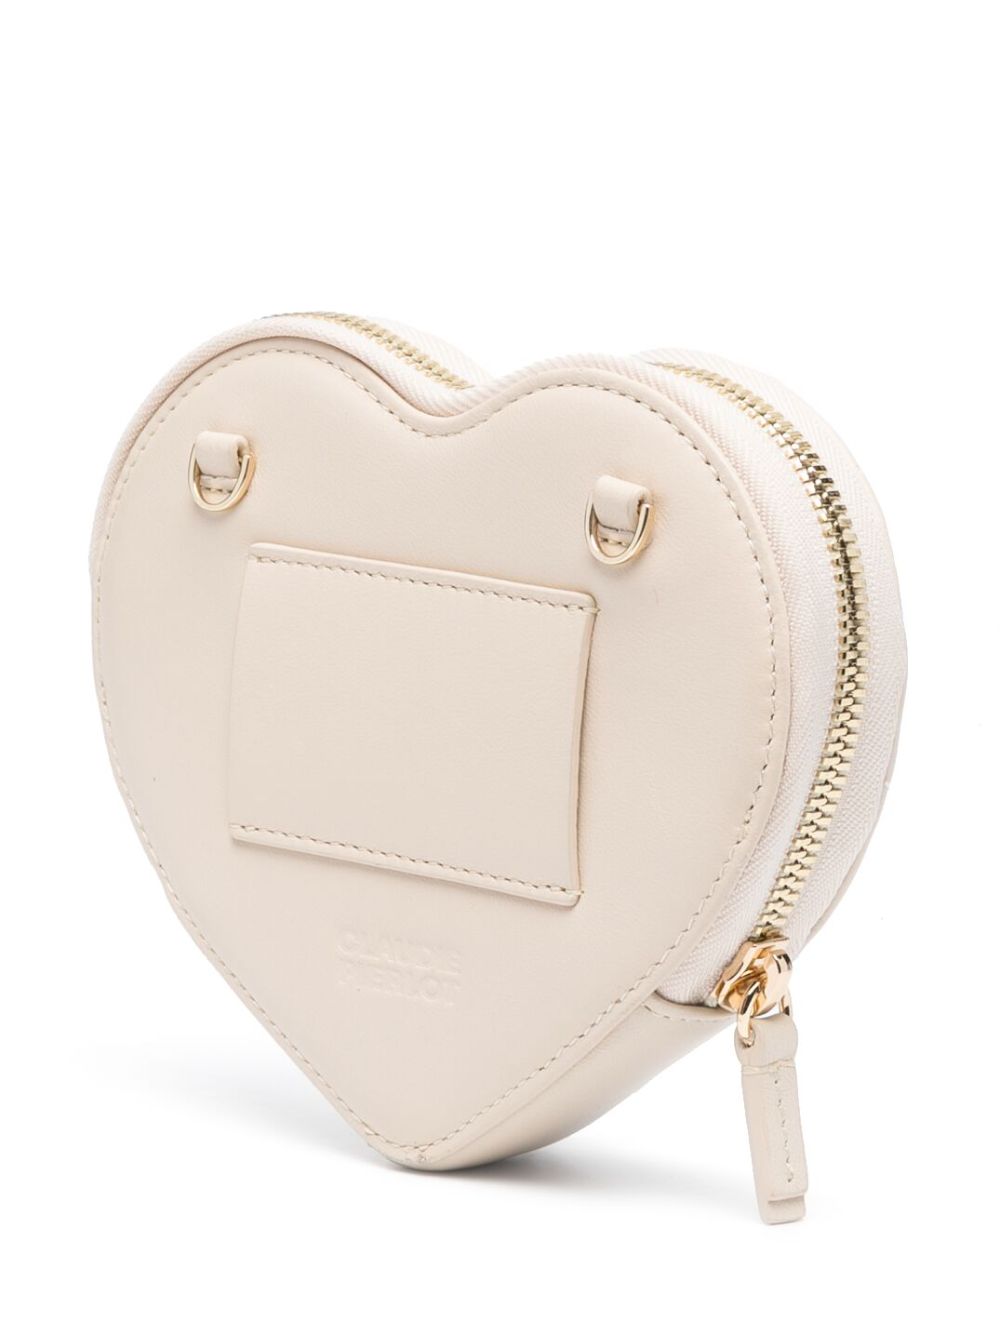 Juicy Heart Shaped Pink Crossbody Bag With Gold Chain and 